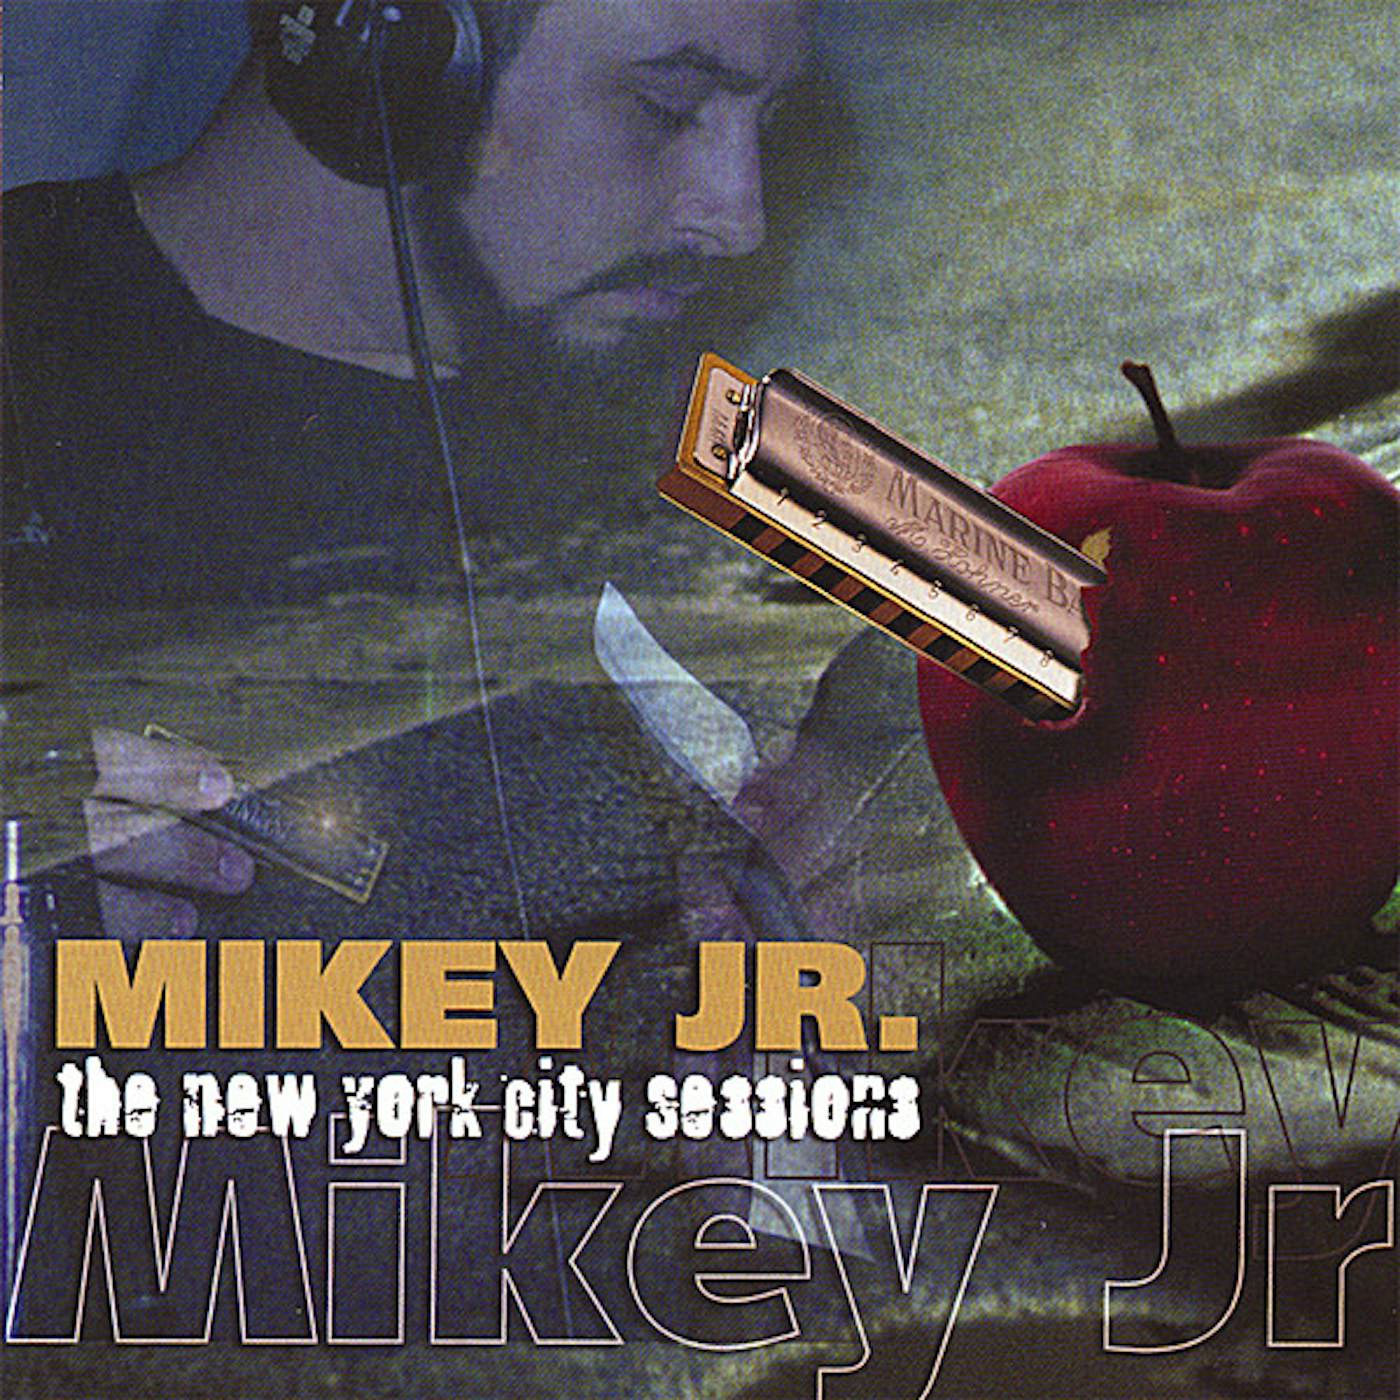 Mikey Junior NEW YORK CITY SESSIONS CD